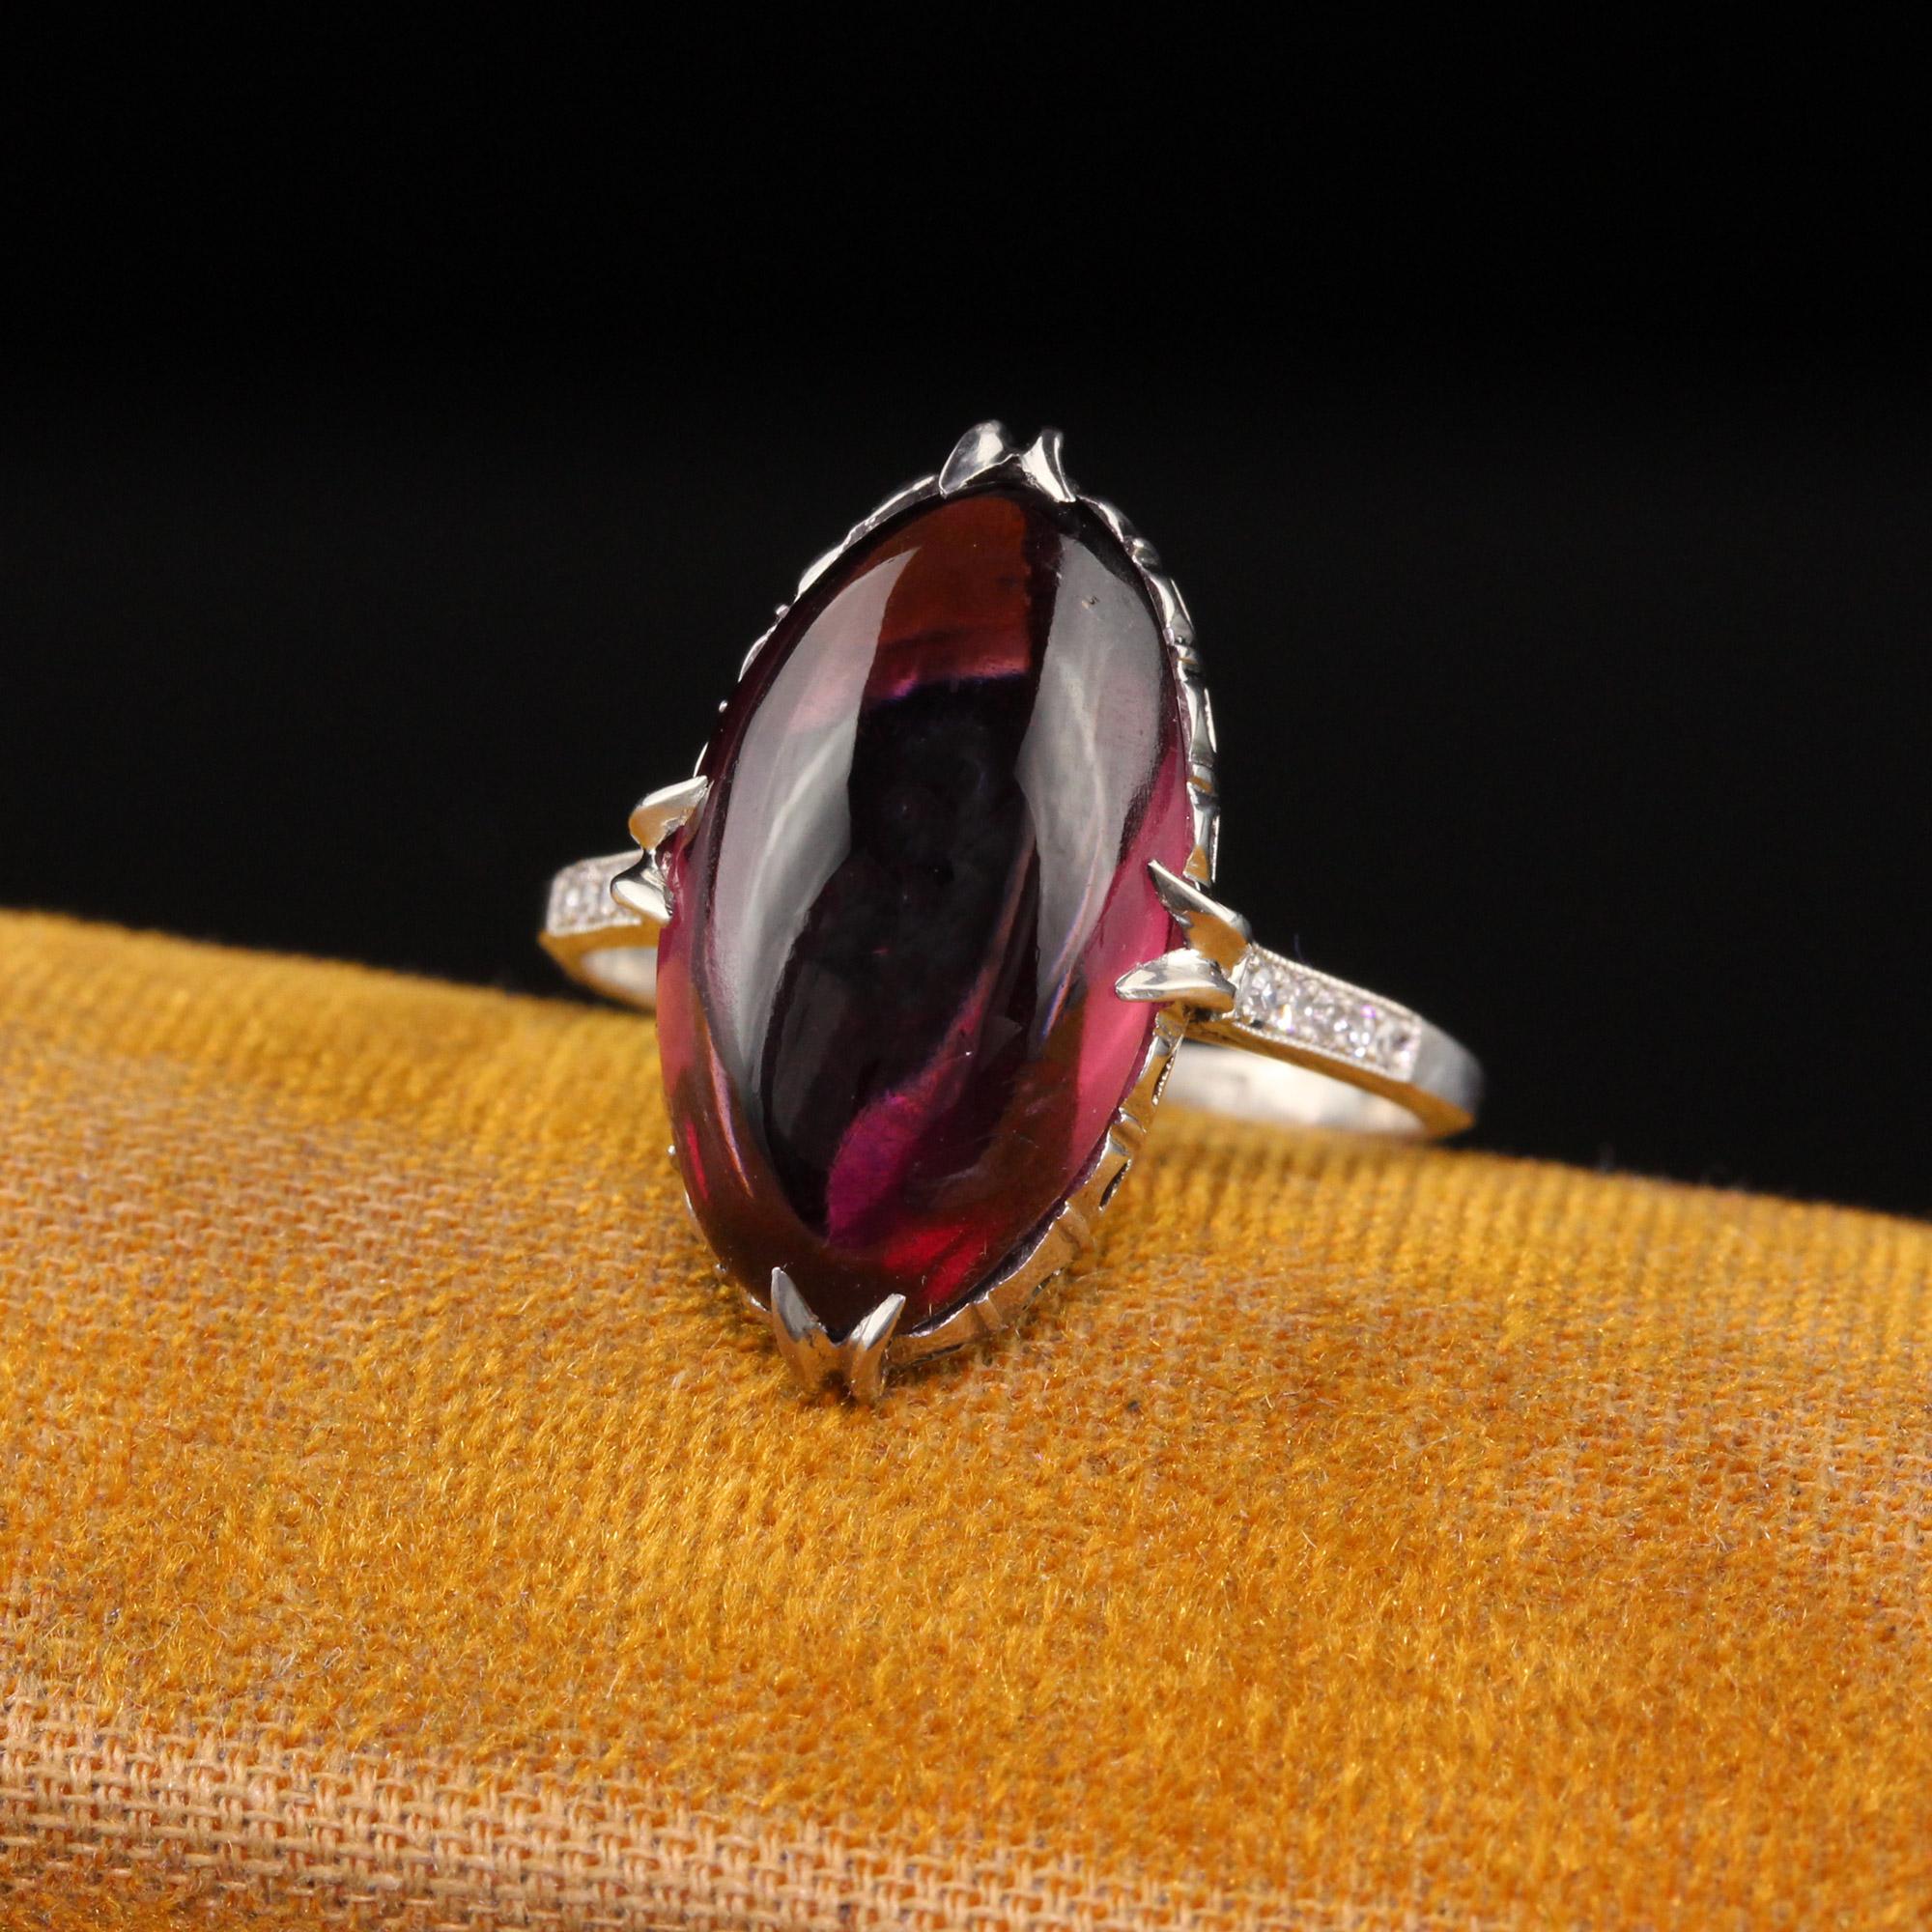 Beautiful Antique Art Deco Platinum Cabochon Rhodolite Garnet and Diamond Cocktail Ring. This beautiful cocktail ring is crafted in platinum. The center holds a vibrant cabochon rhodolite garnet and has single cut diamonds going down the shank. The